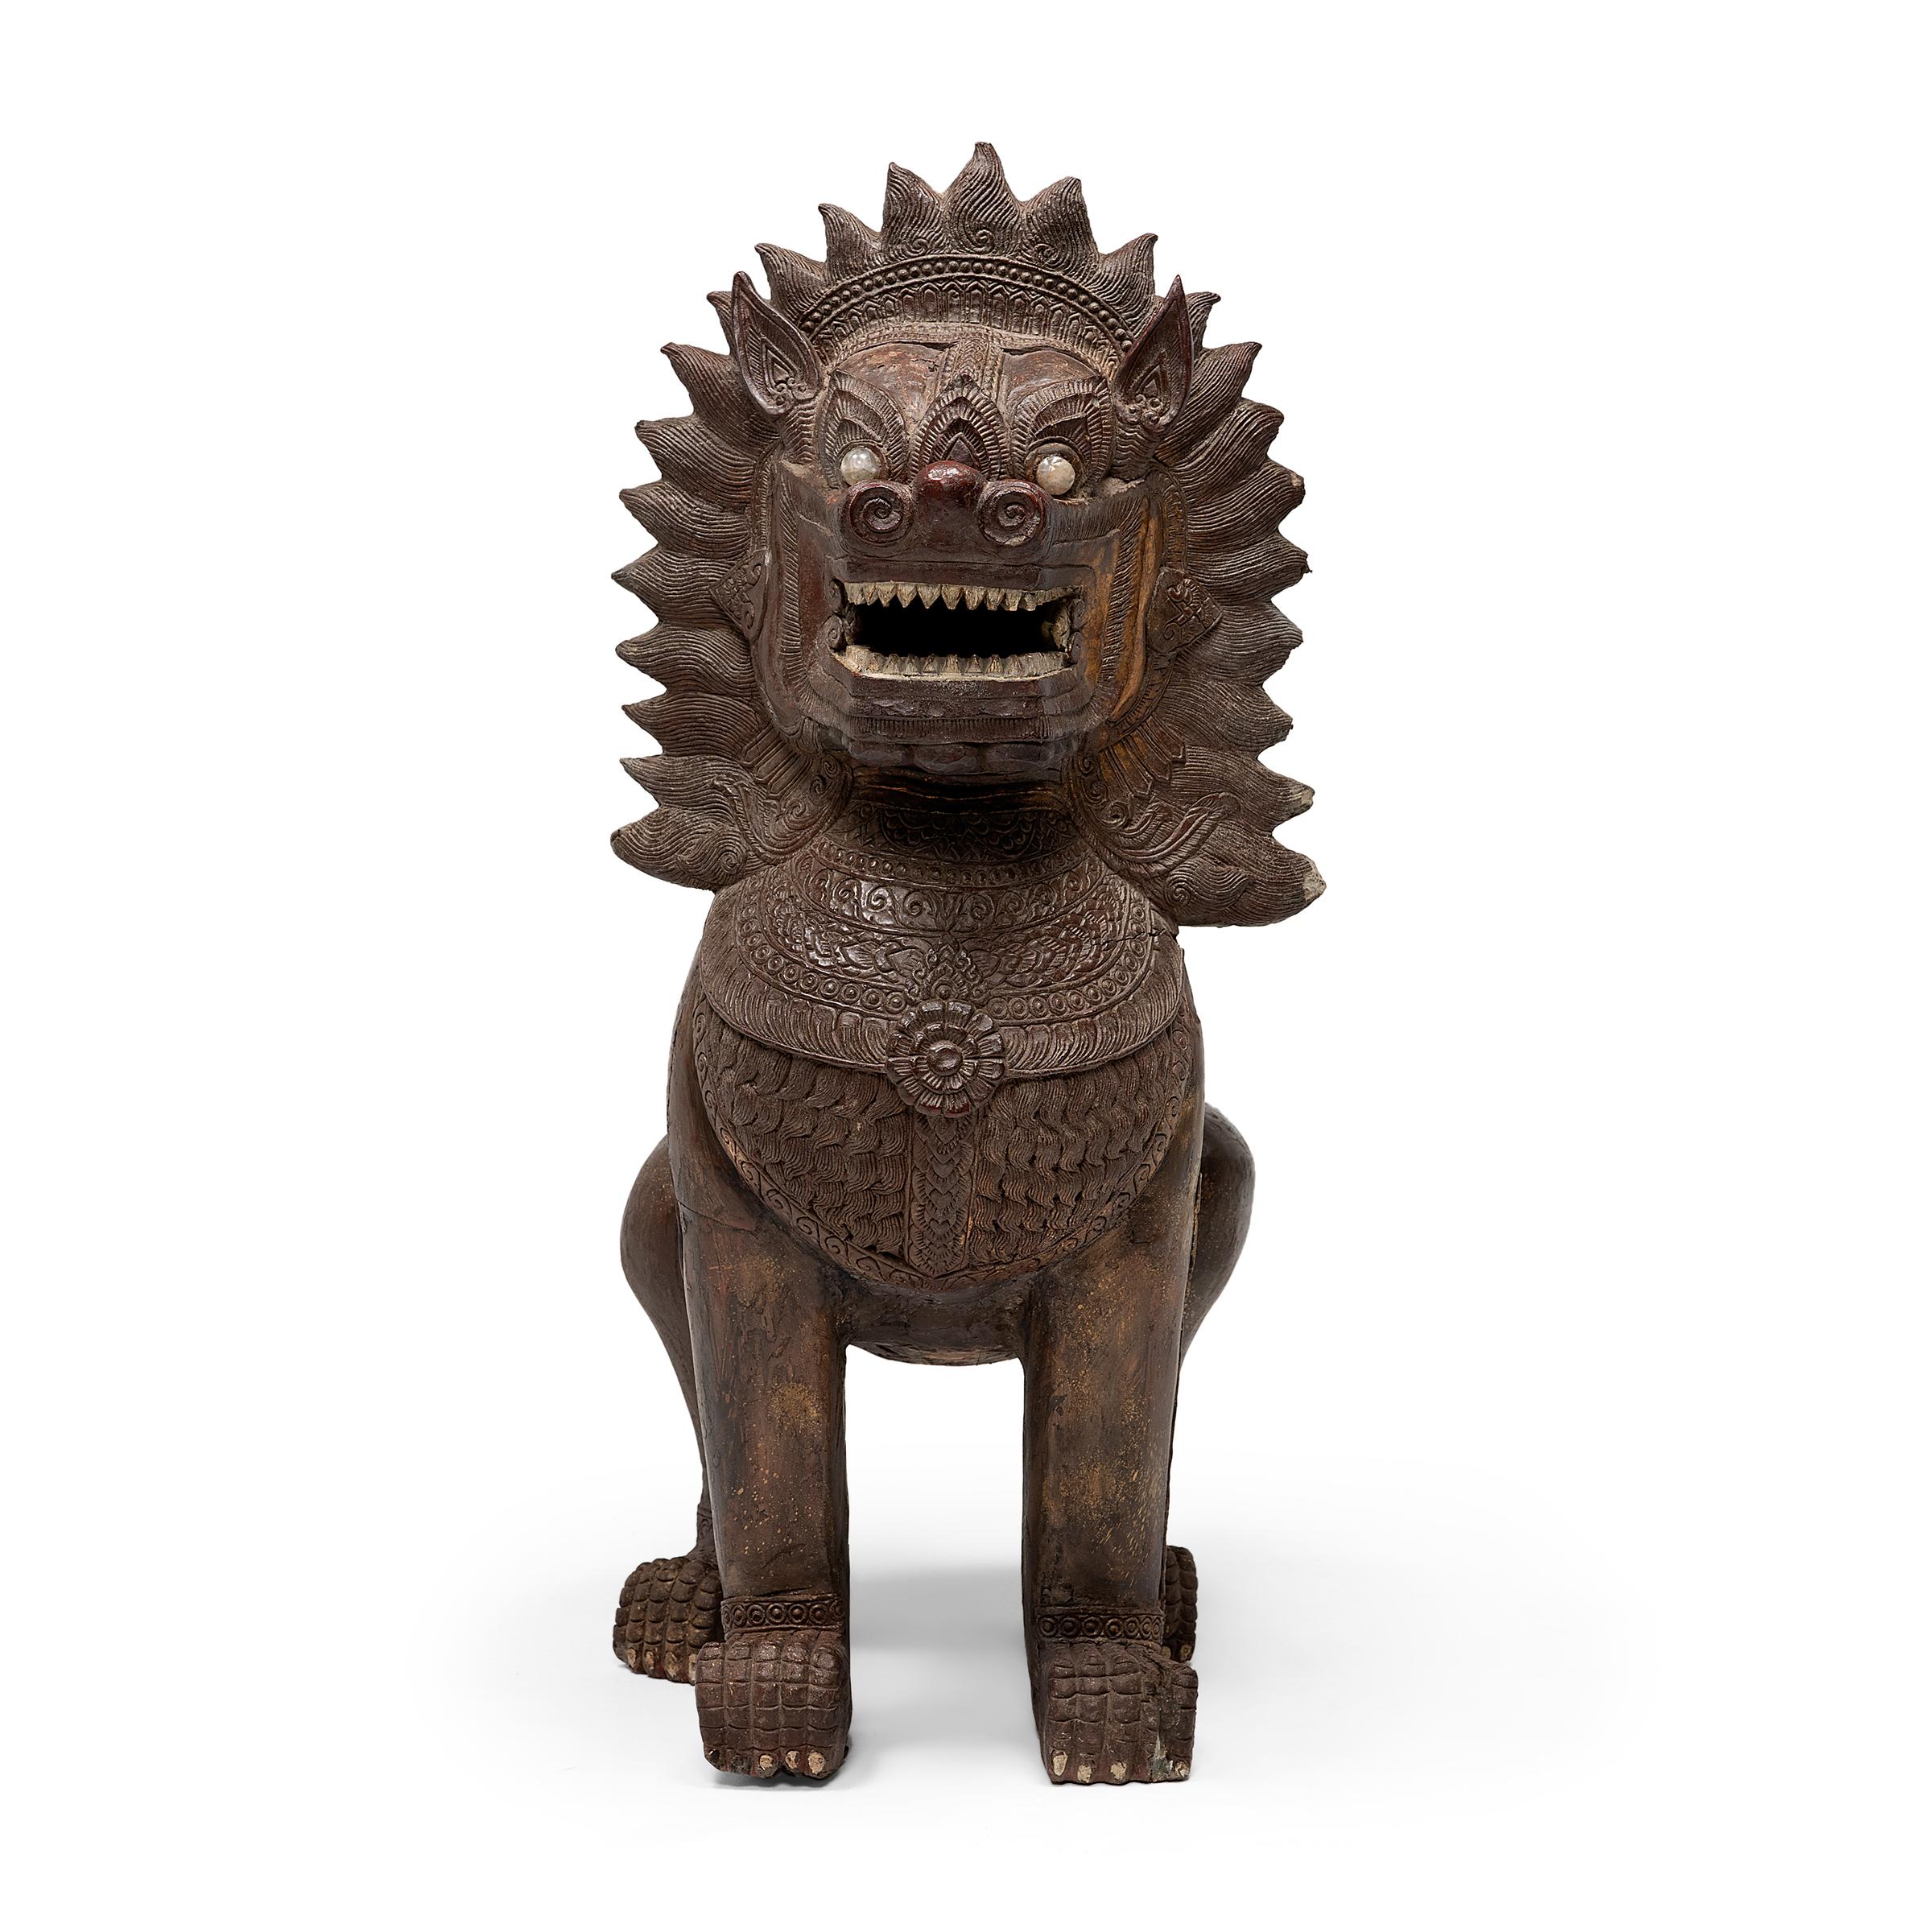 Grand and imposing, these monumental lion sculptures offer protection to all those who stand before them. Dated to the mid-19th century, the majestic pair is sculpted of carved wood and molded plaster with a gilt and polychrome finish, with